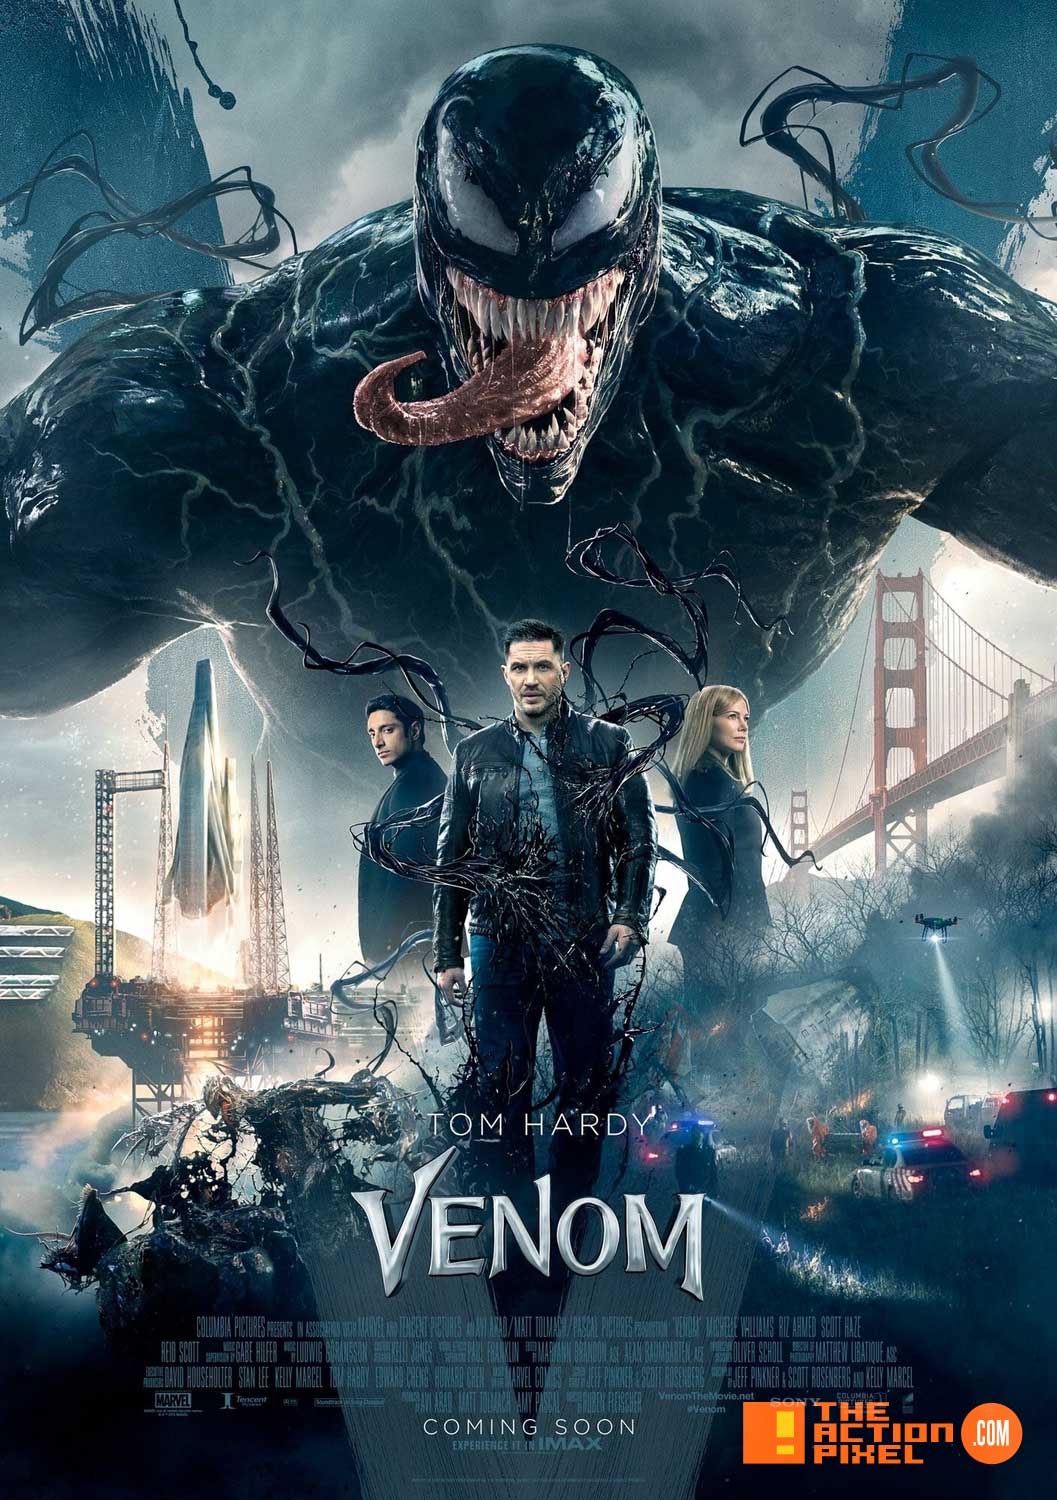 Venom” looms over a cacophony of image in the new Sony poster